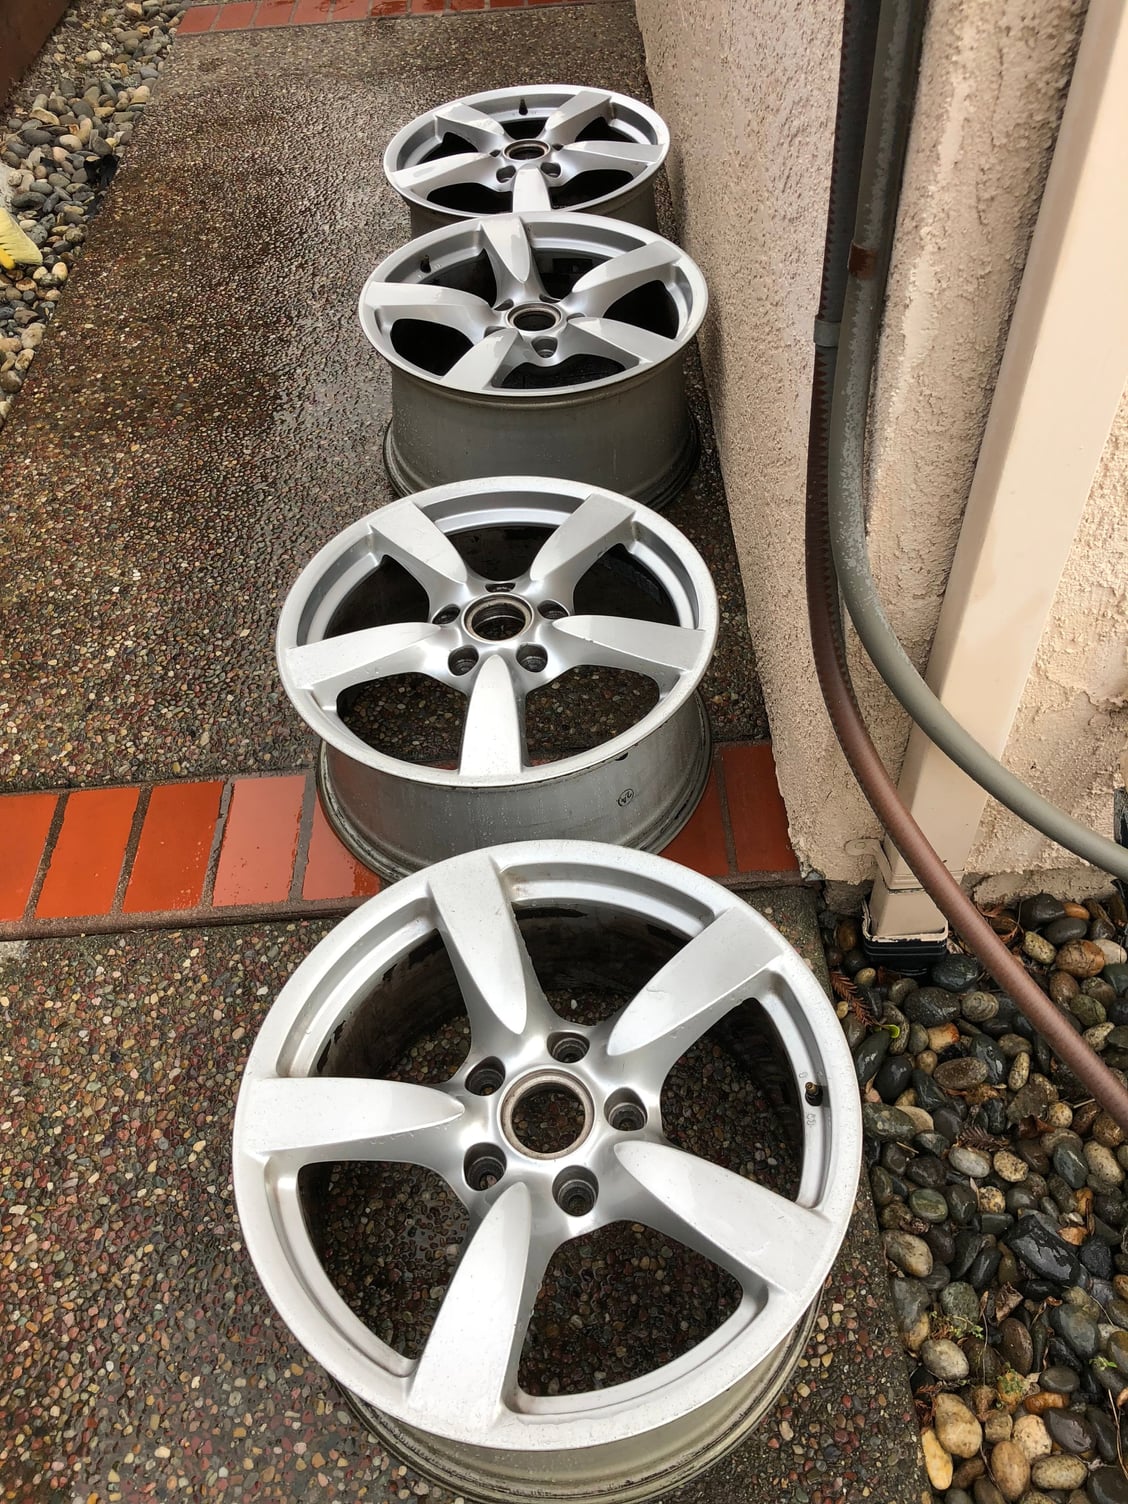 Wheels and Tires/Axles - Porsche Cayman Wheels - Used - 2006 to 2012 Porsche Cayman - Union City, CA 94587, United States